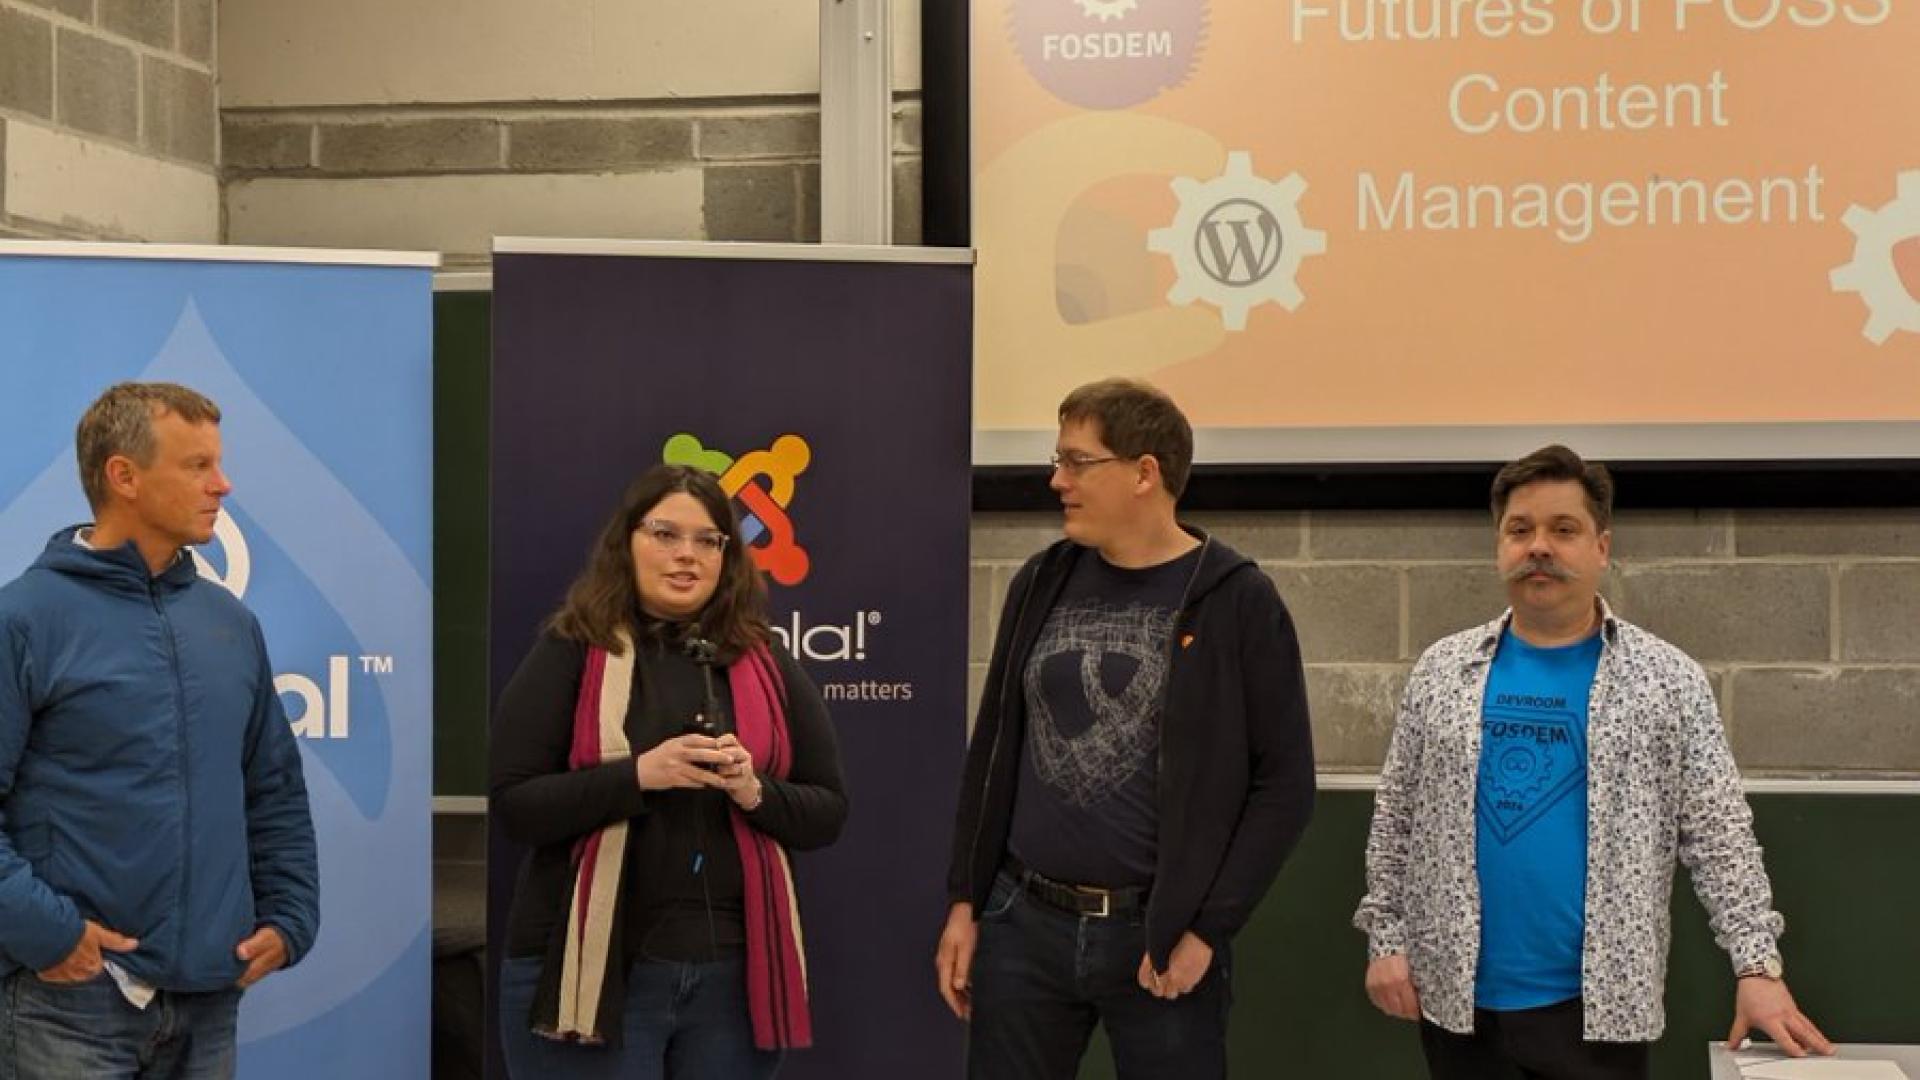 Image from FOSDEM